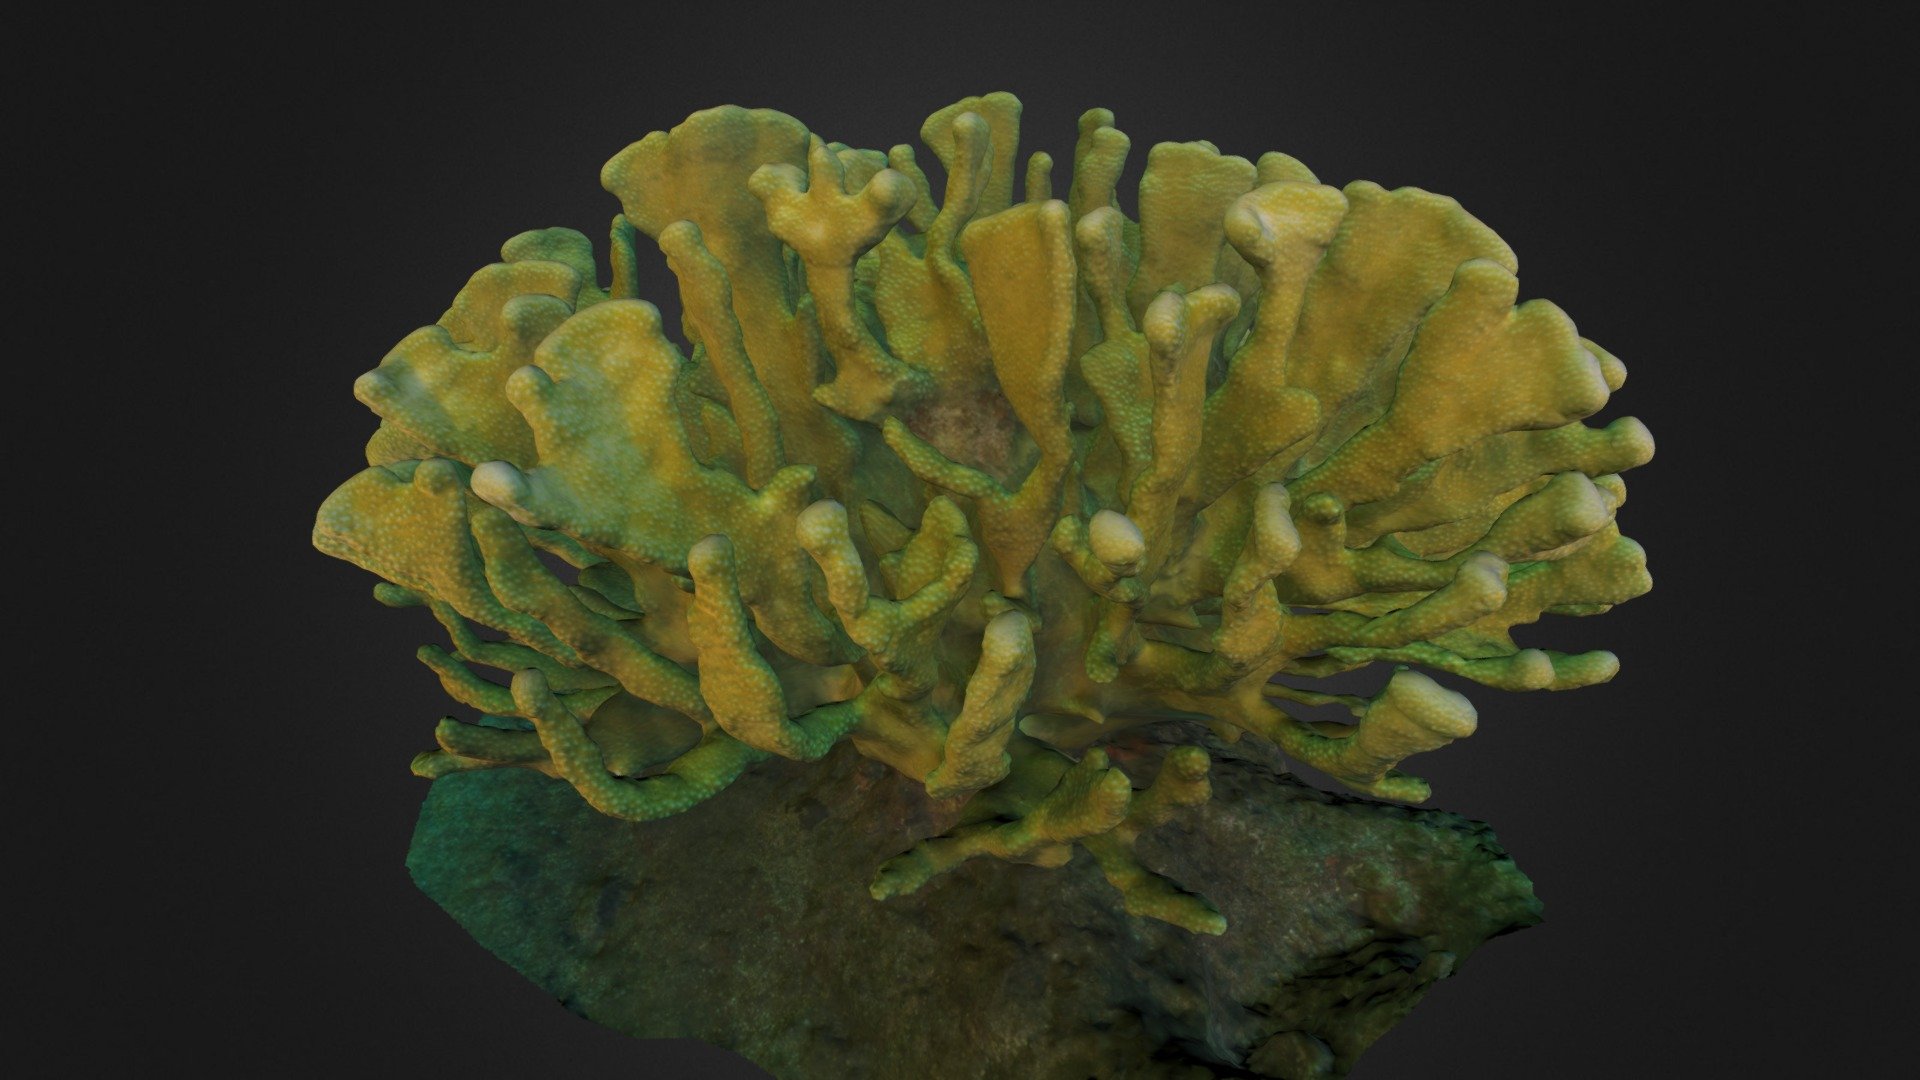 This coral is from the waters of Kalaupapa, HI.

We are utilizing Autodesk's cutting edge 3D software to model corals at high resolution for revolutionary scientific monitoring and education.

For more info of our 3D coral projects, visit www.thehydro.us! - Pocillopora eydouxi - Download Free 3D model by thehydrous (@thehydro.us) 3d model